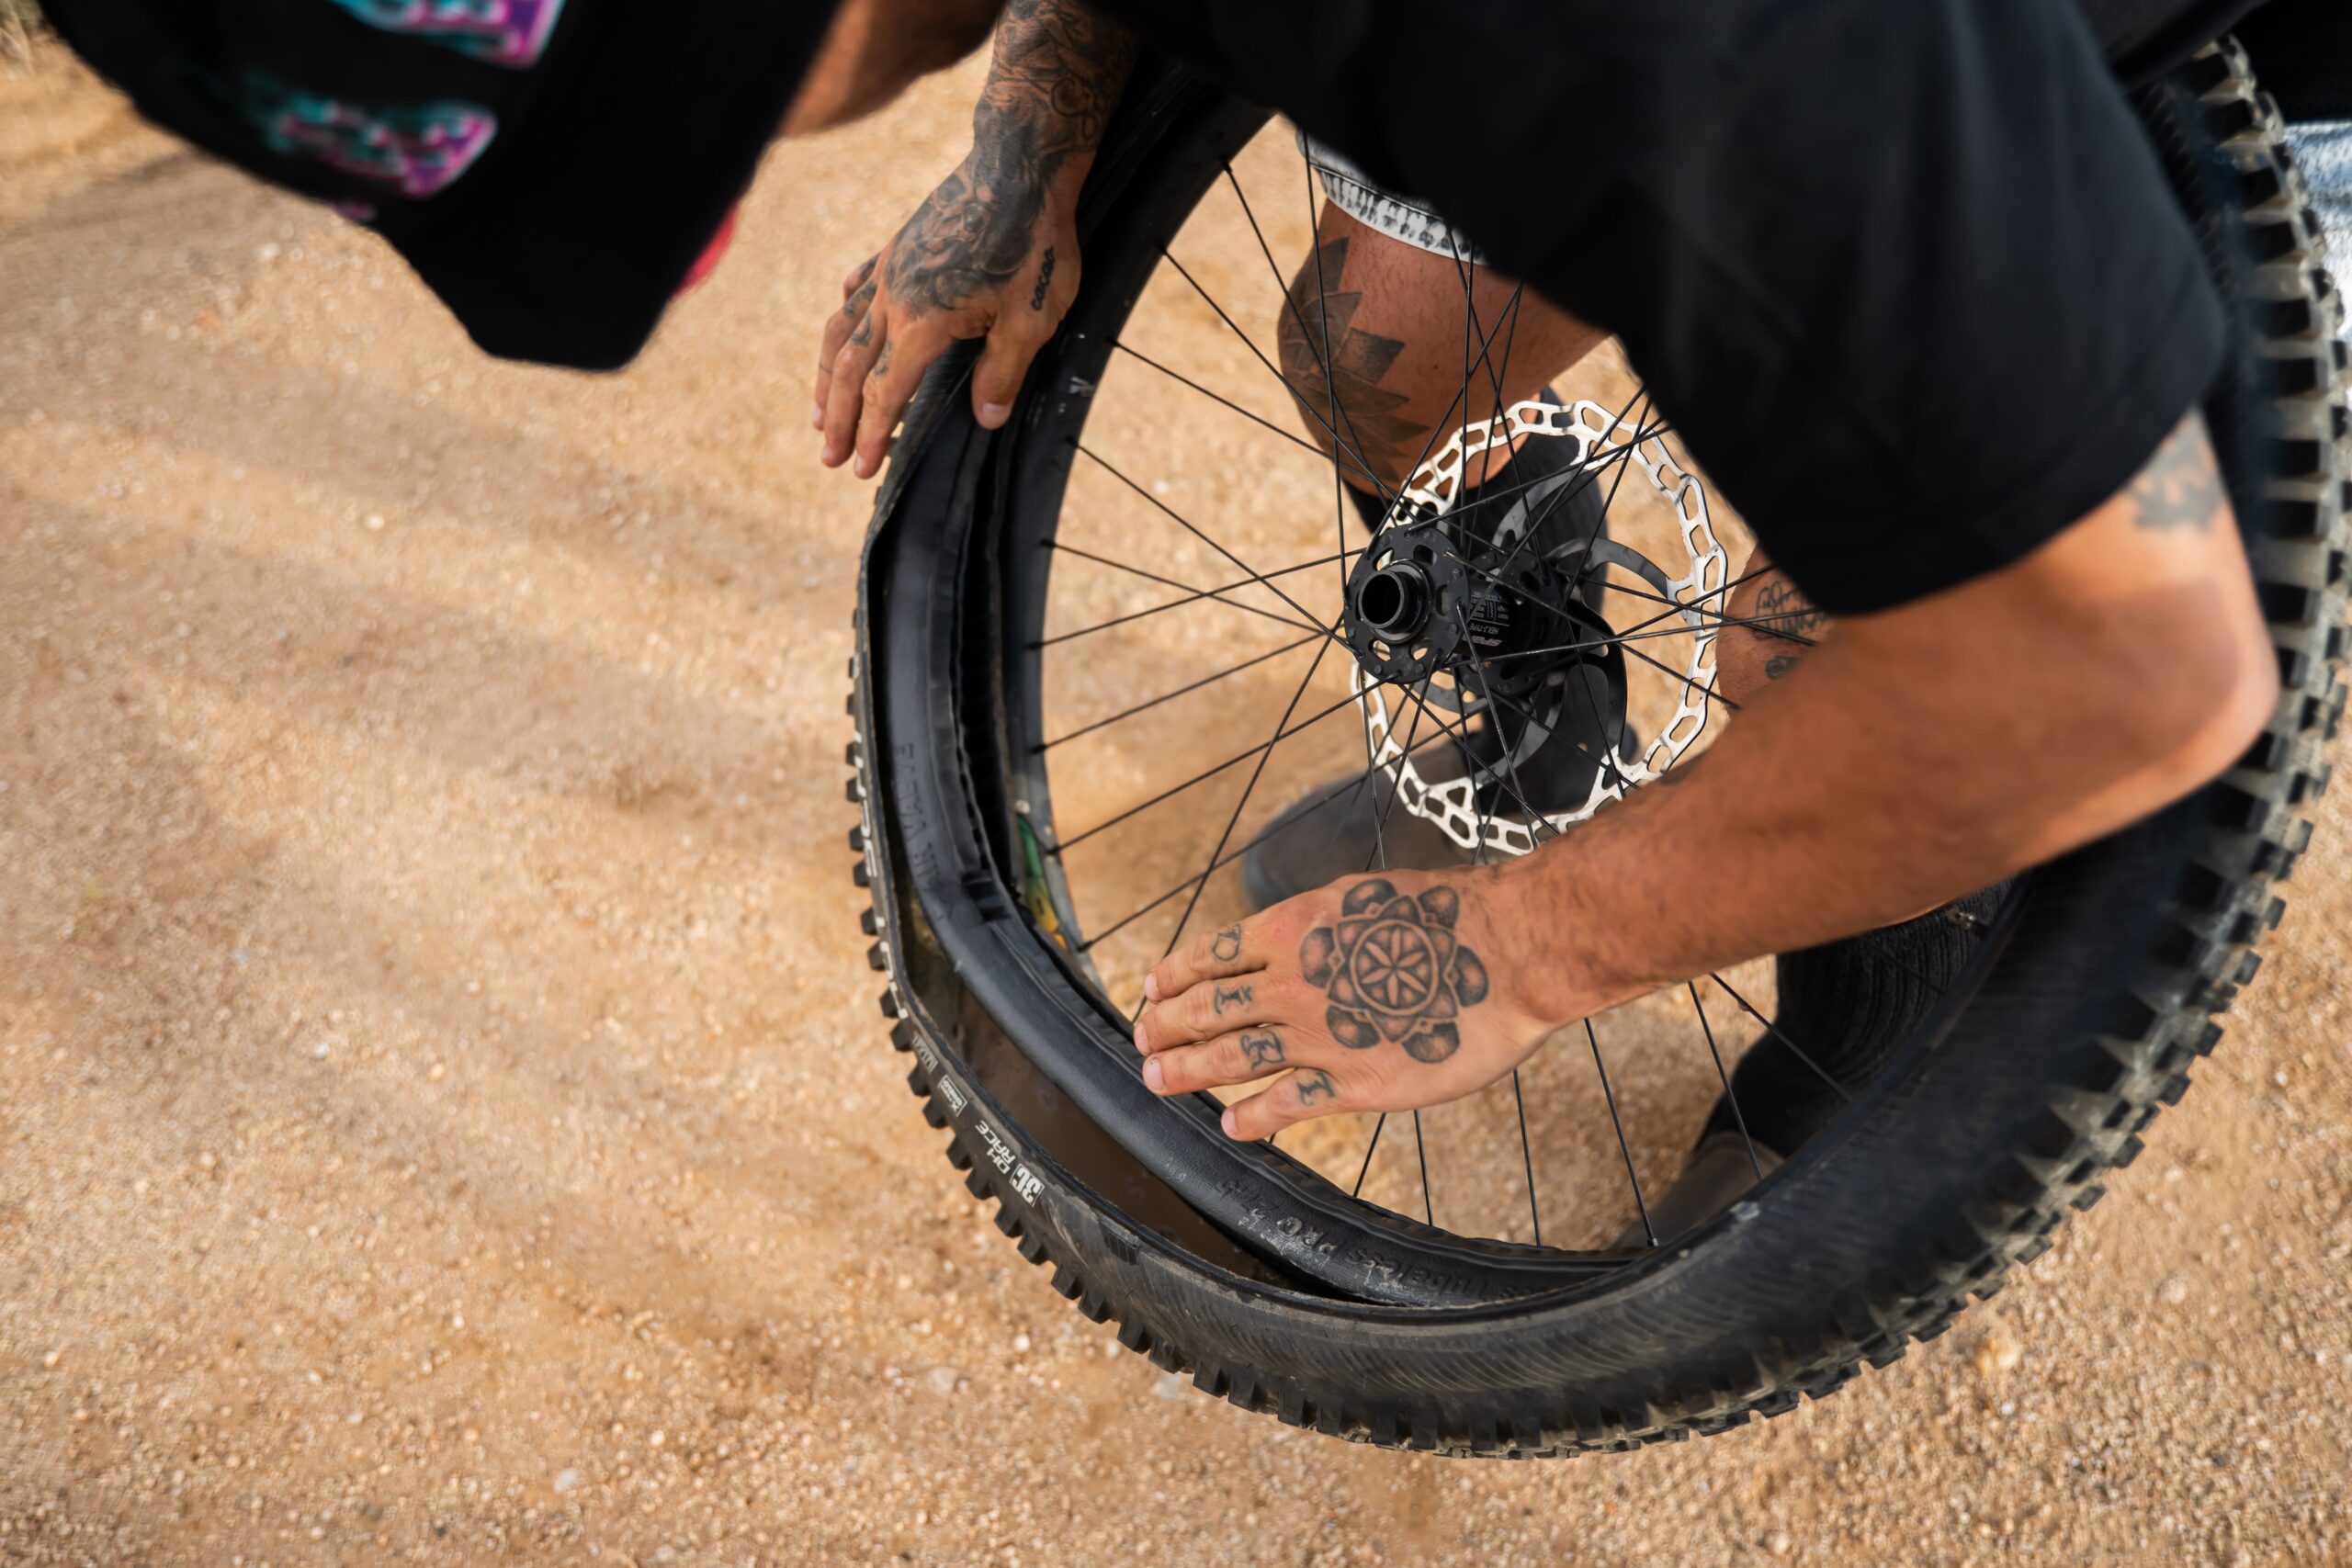 Tannus Tubeless Fusion anti-puncture insert for e-bikes being installed on a tire by freerider Bienvenido Aguado